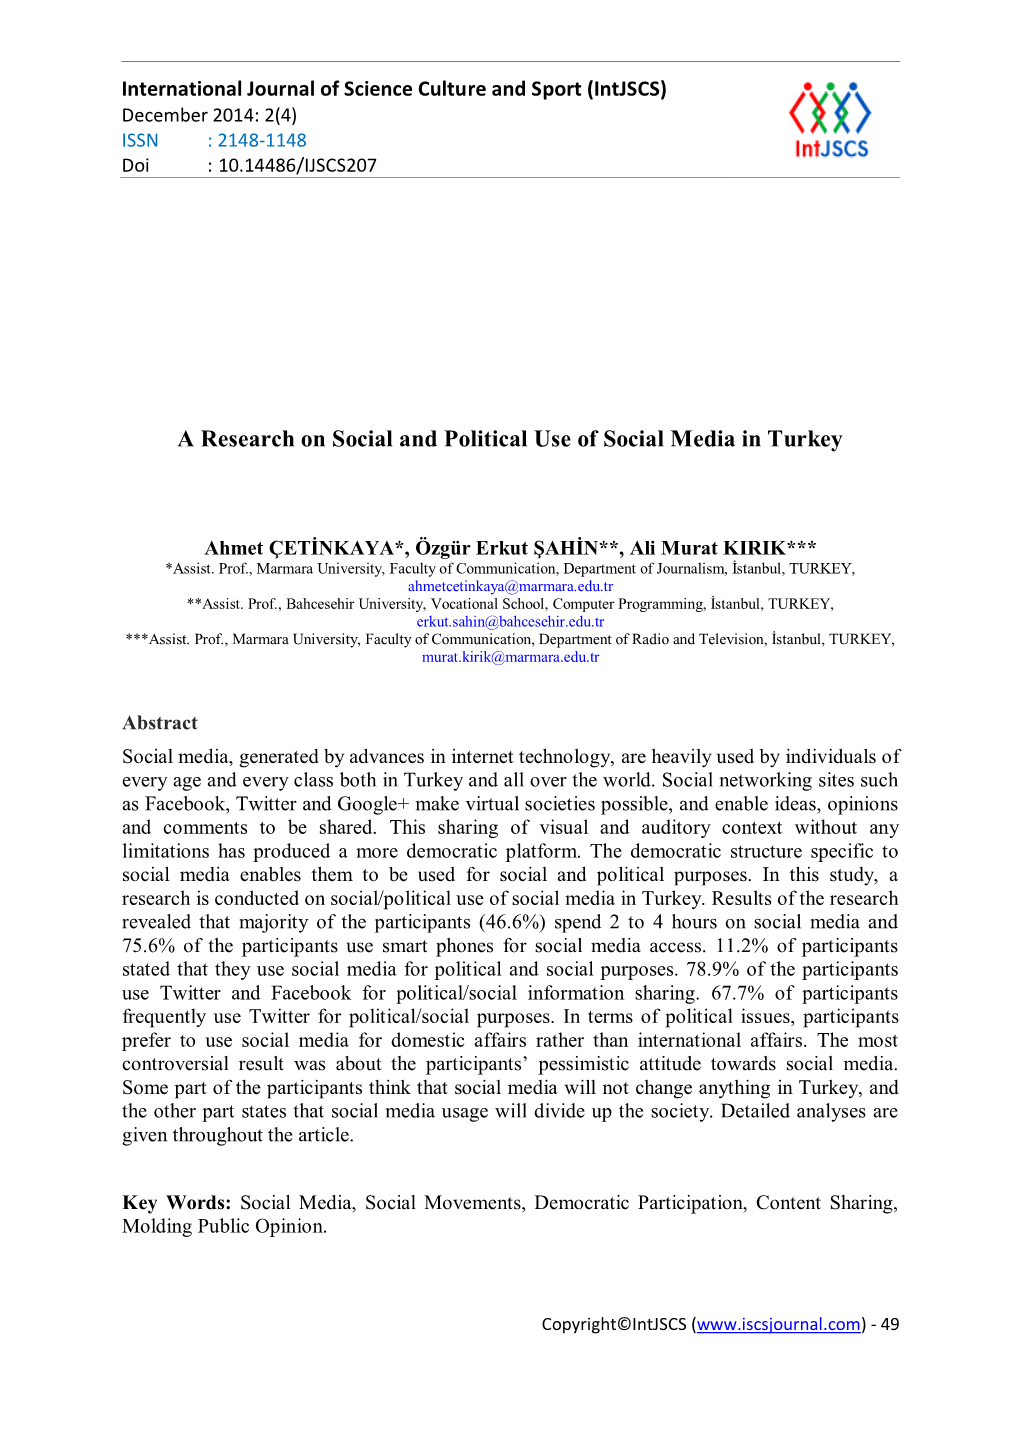 A Research on Social and Political Use of Social Media in Turkey